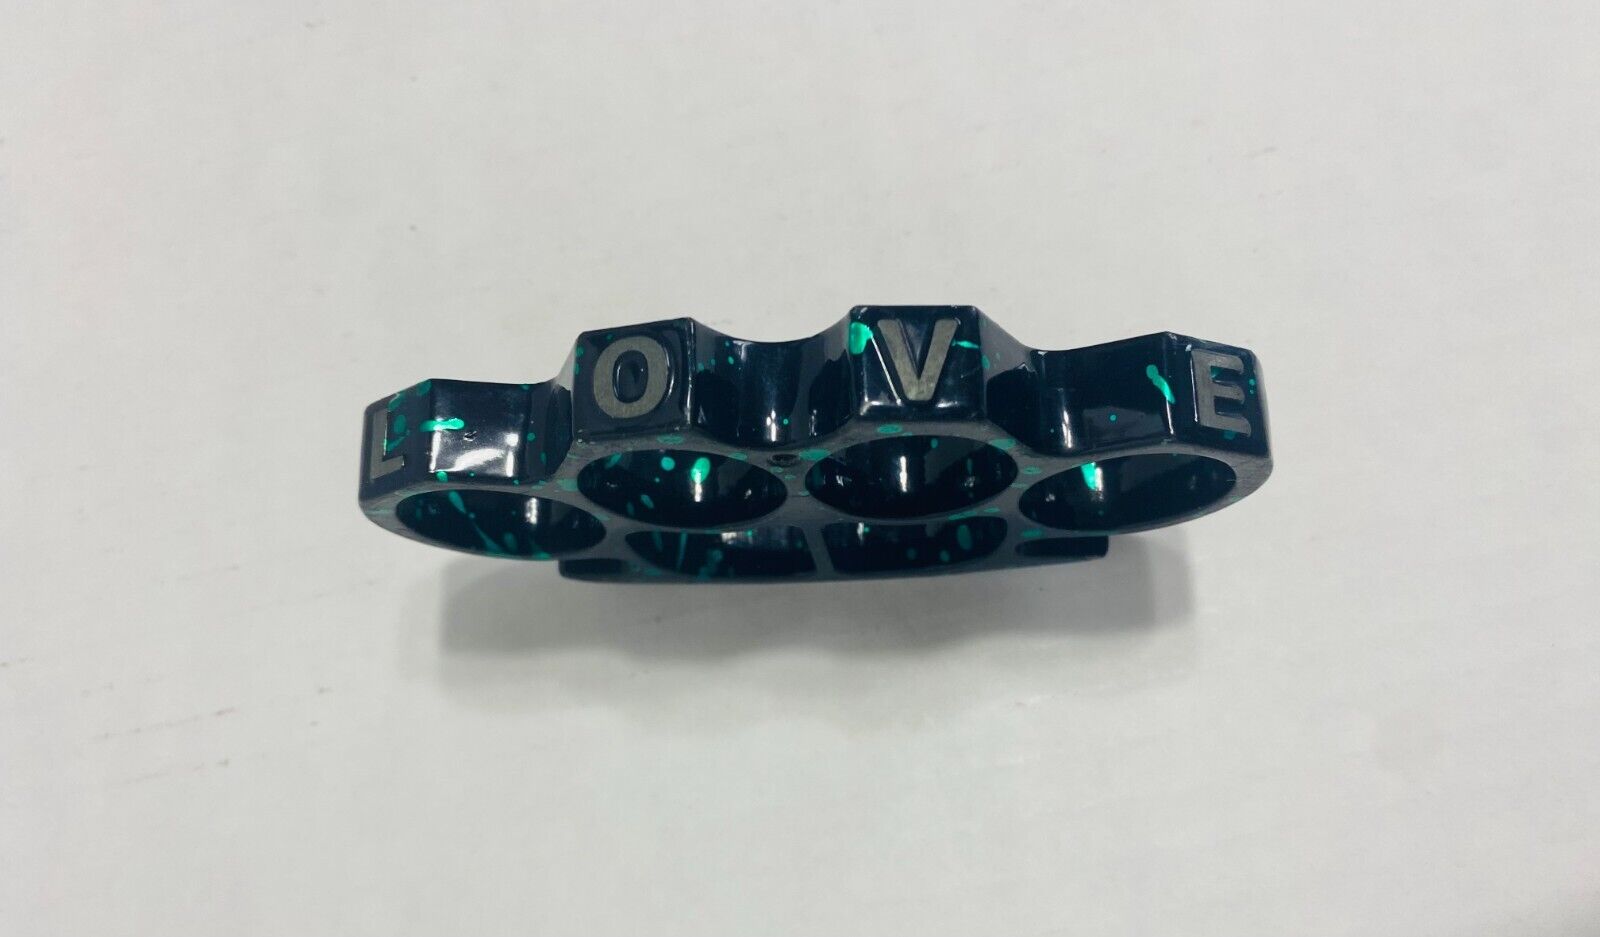 Vintage Black Metal Nuckles with Green Splatter and the word L O V E on them.